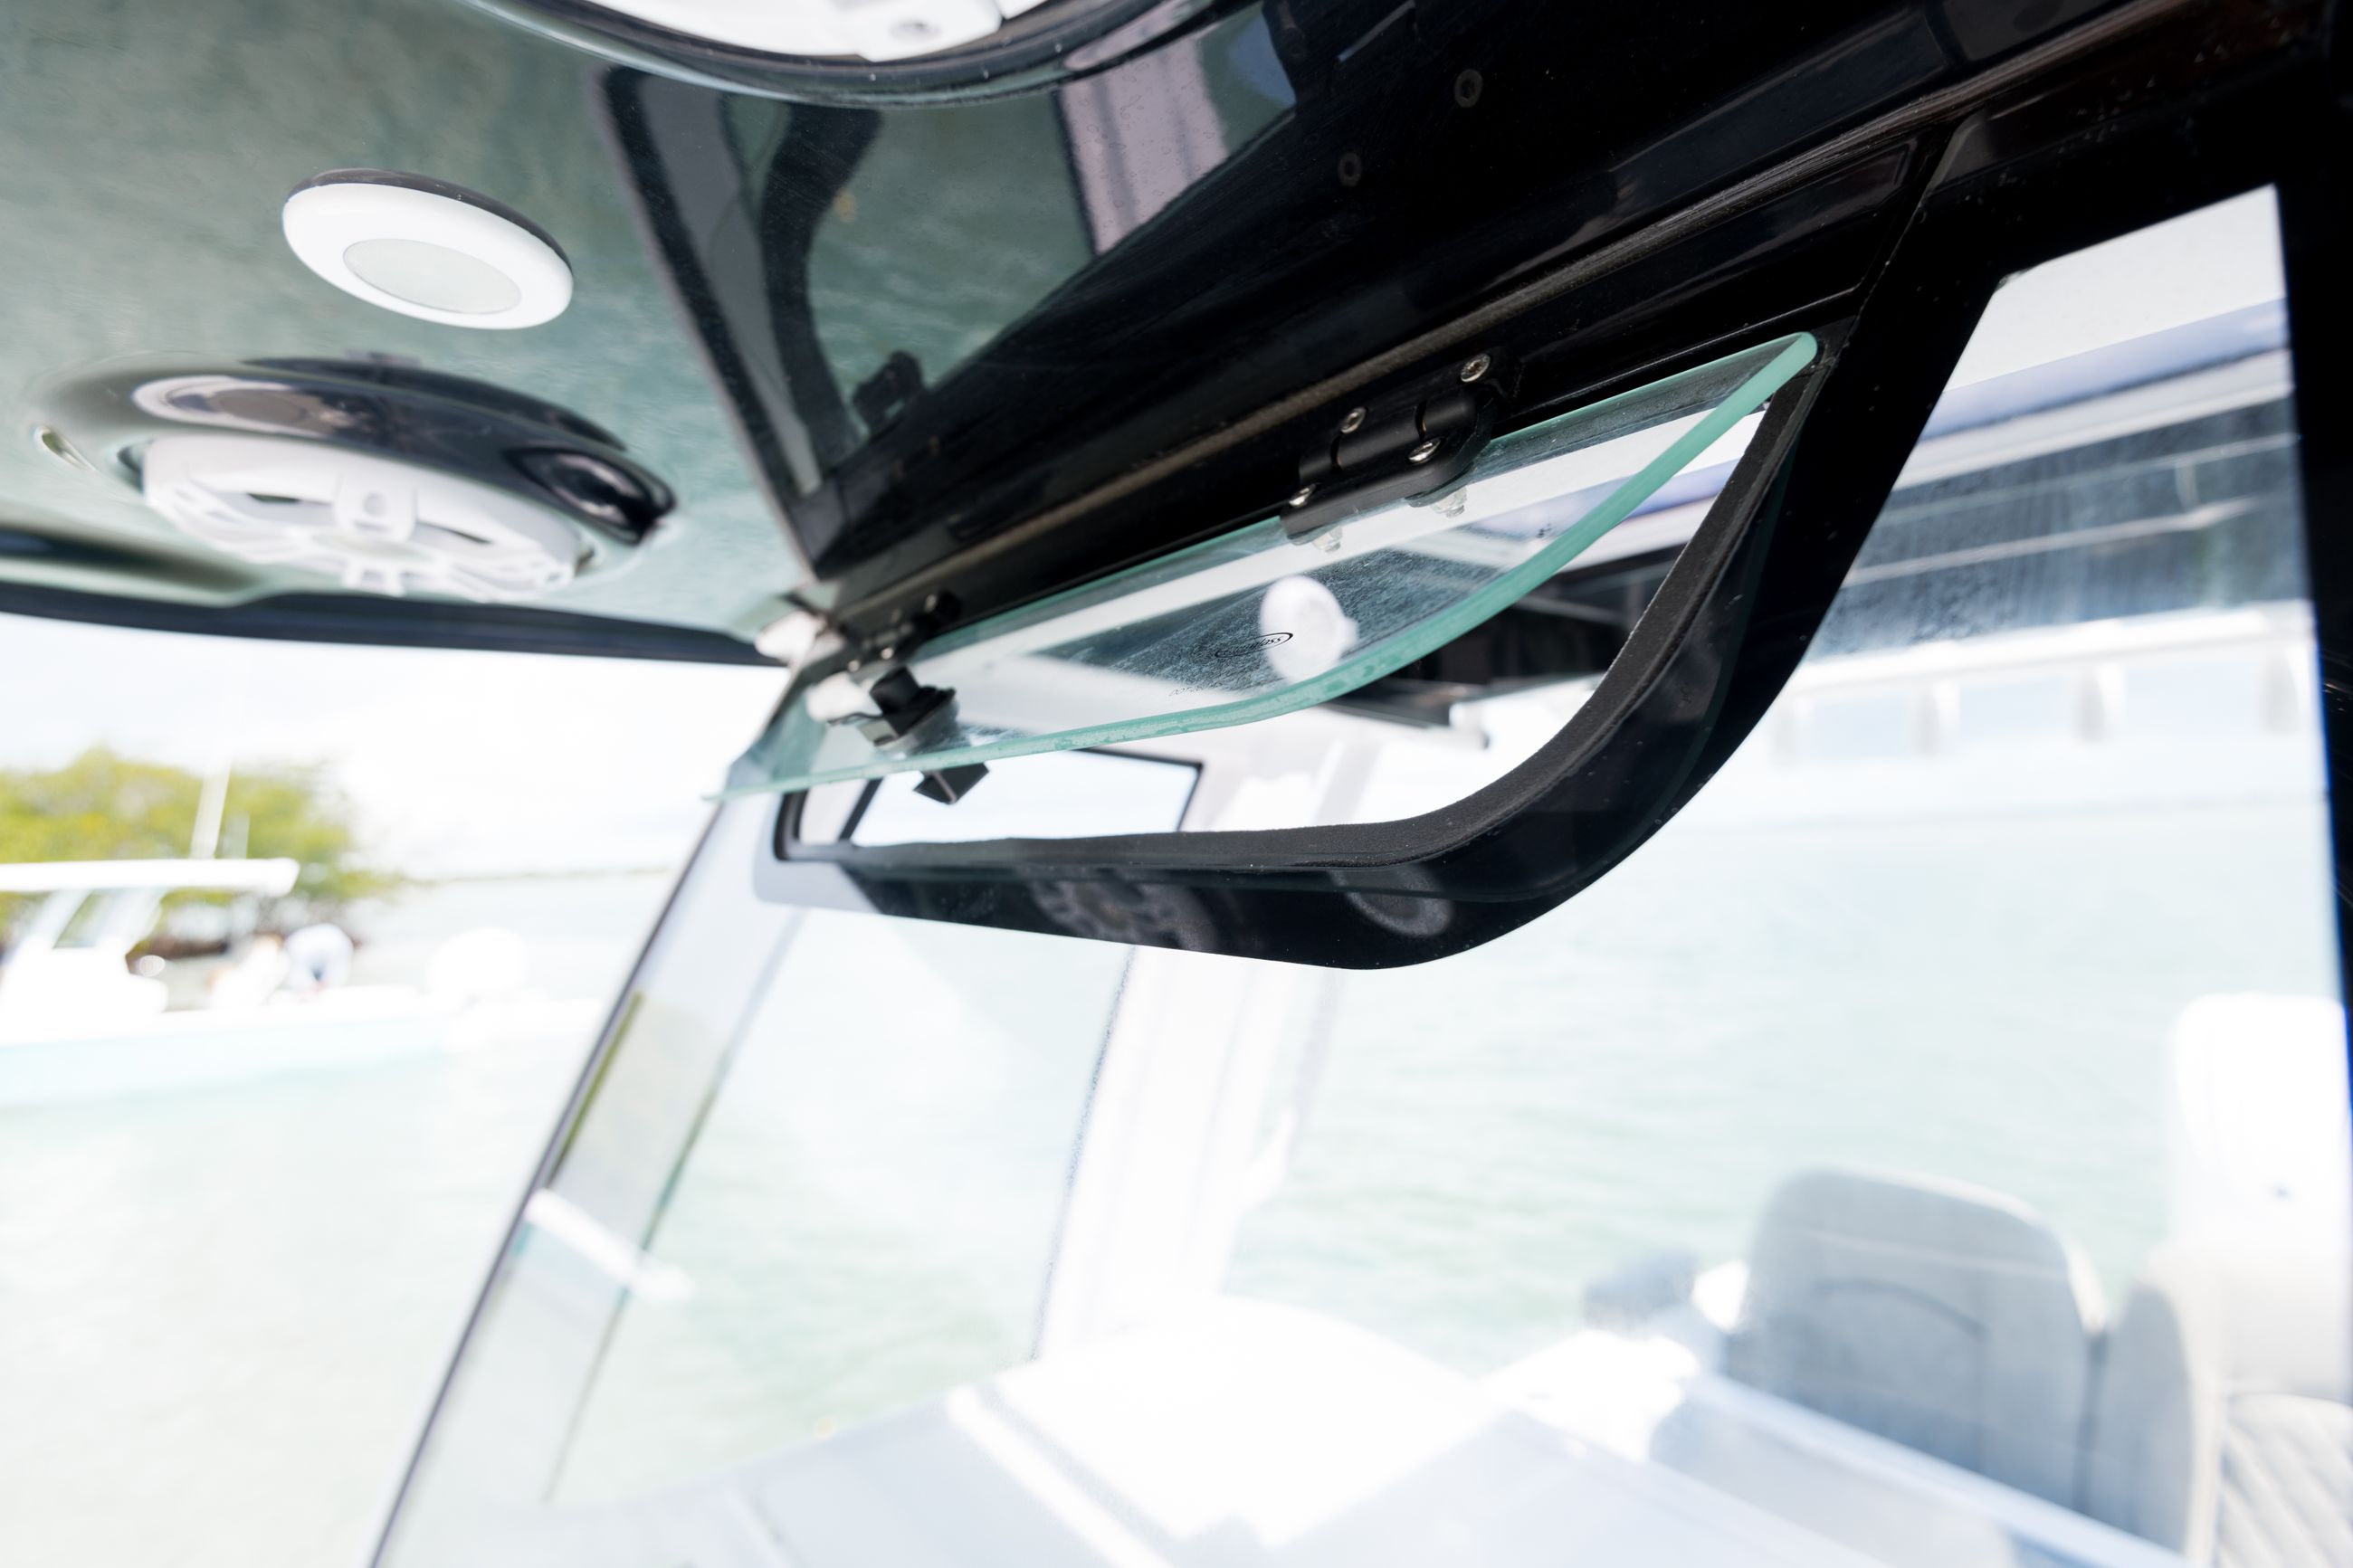 Detail image of Integrated Tempered Glass Windshield w/ Manual Vent